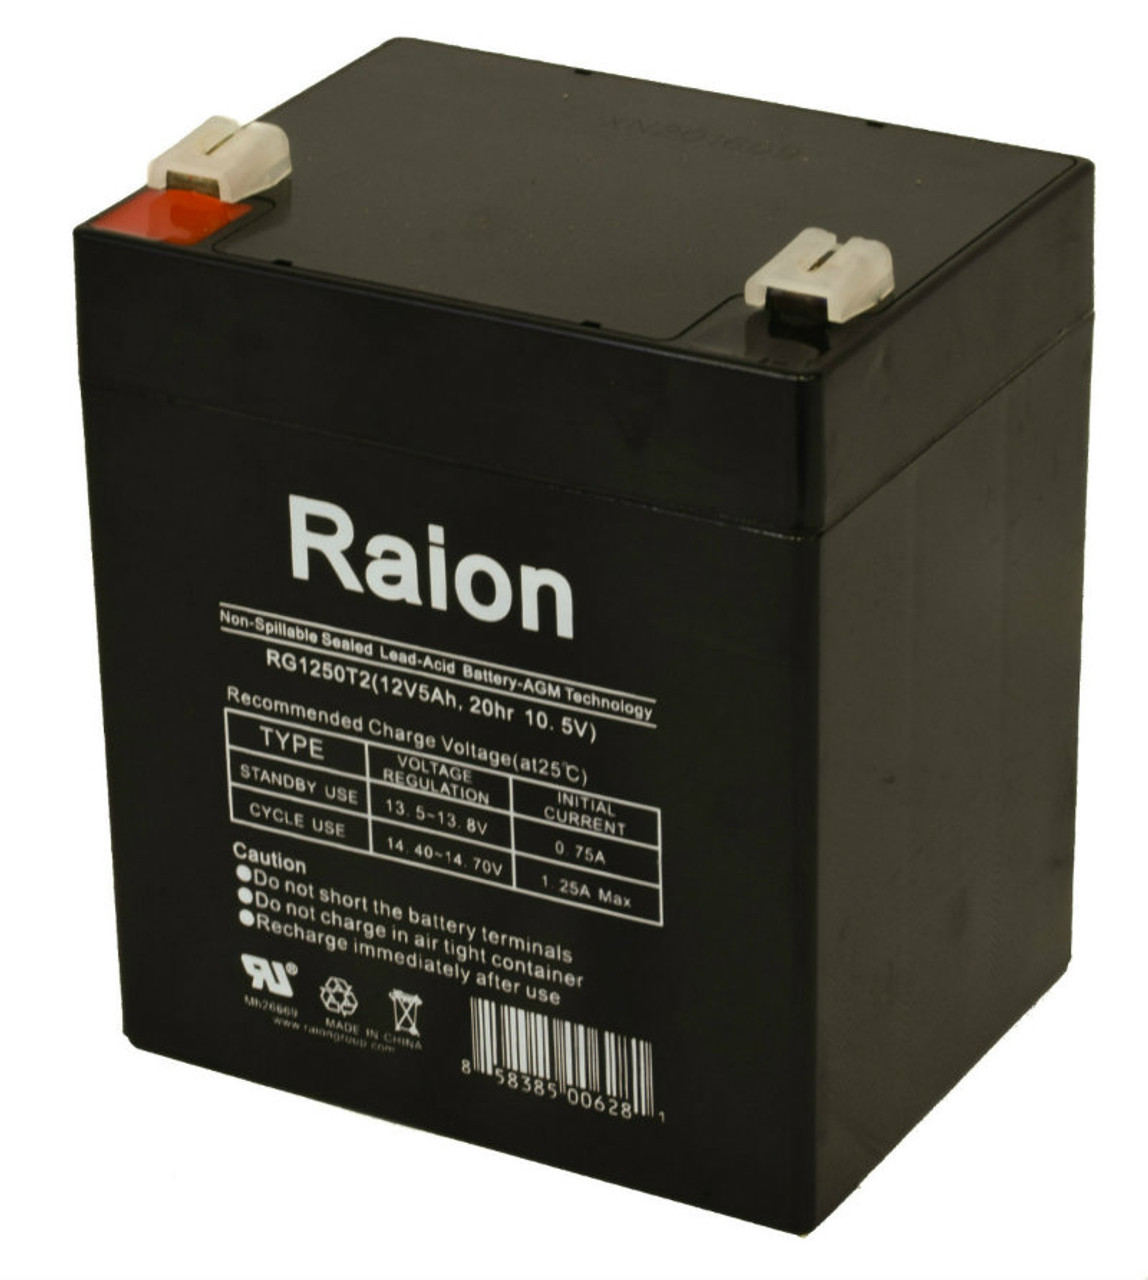 Raion Power 12V 5Ah Replacement Fire Alarm Control Panel Battery for Securitron DK15